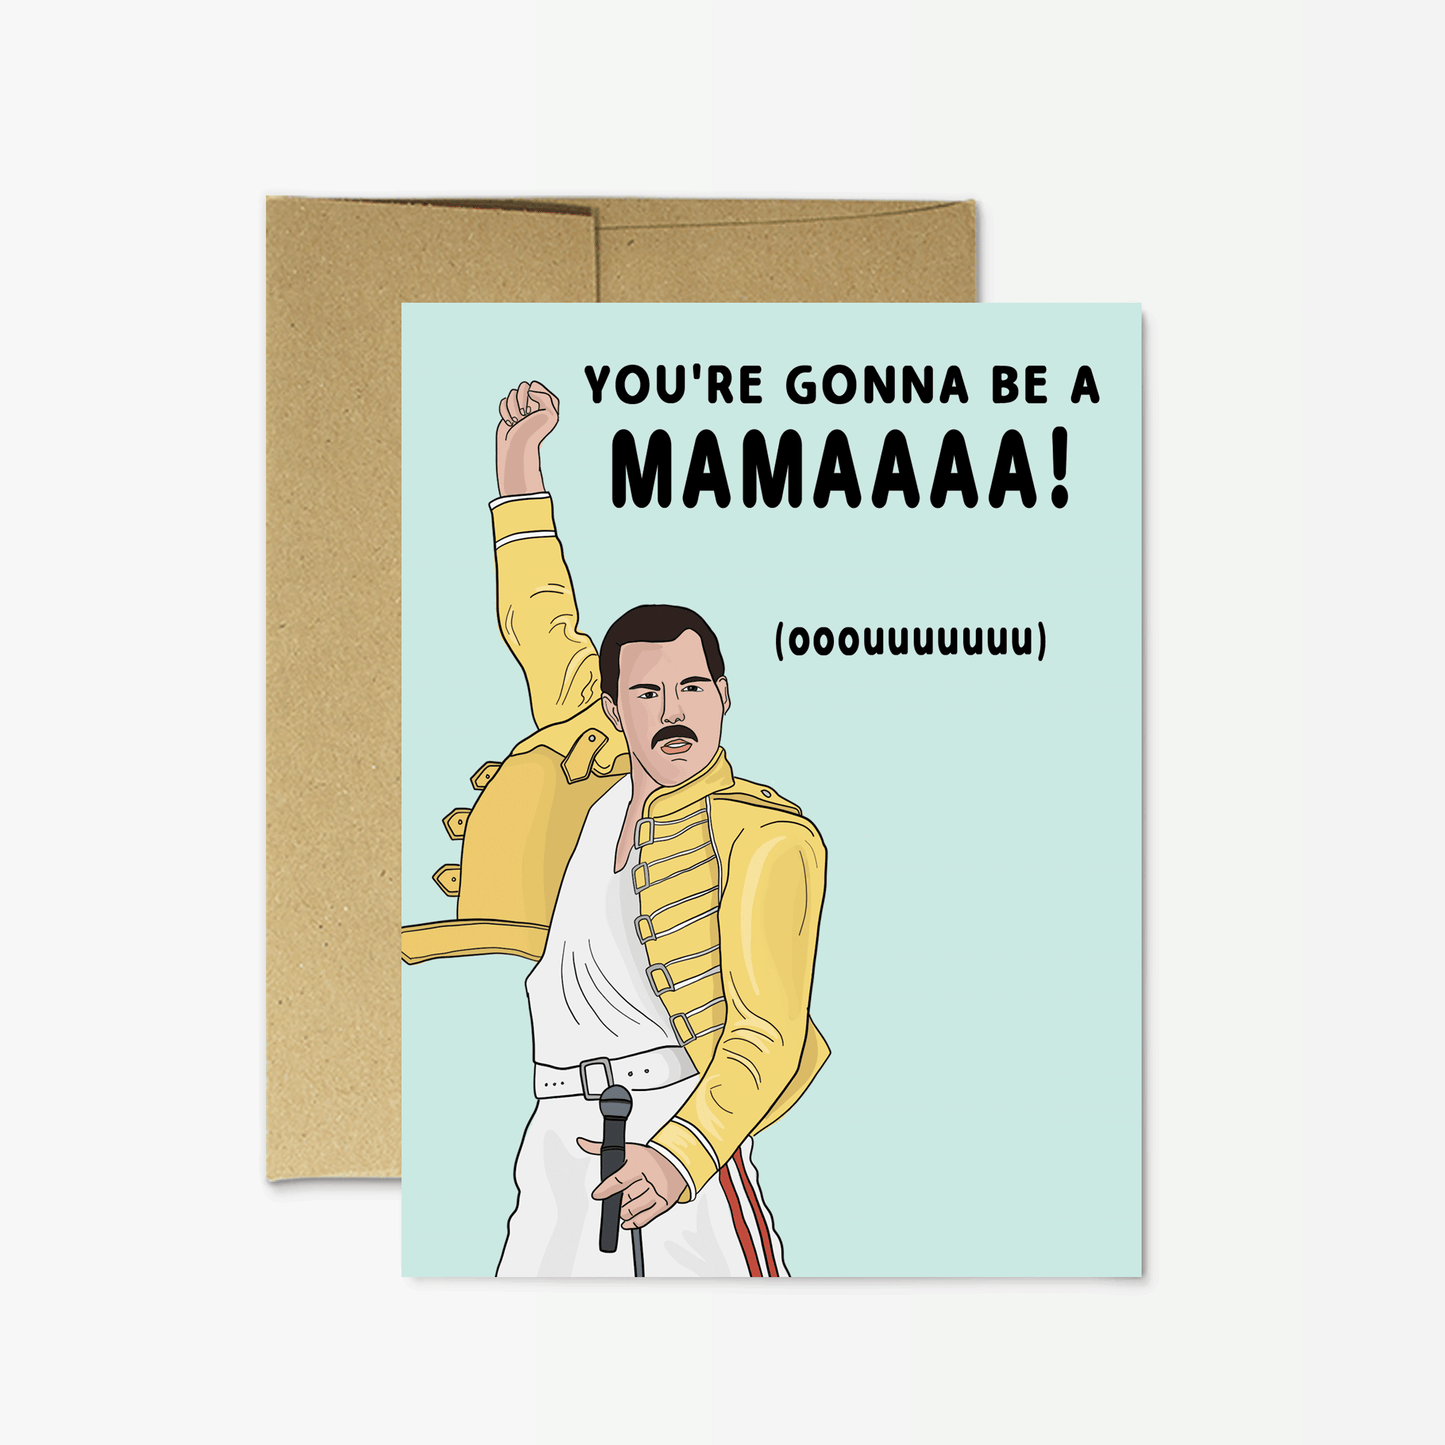 Freddie Mercury You're Gonna Be A Mamaaa! (ooouuuuuuuu) - New Mother Greeting Card - Mellow Monkey